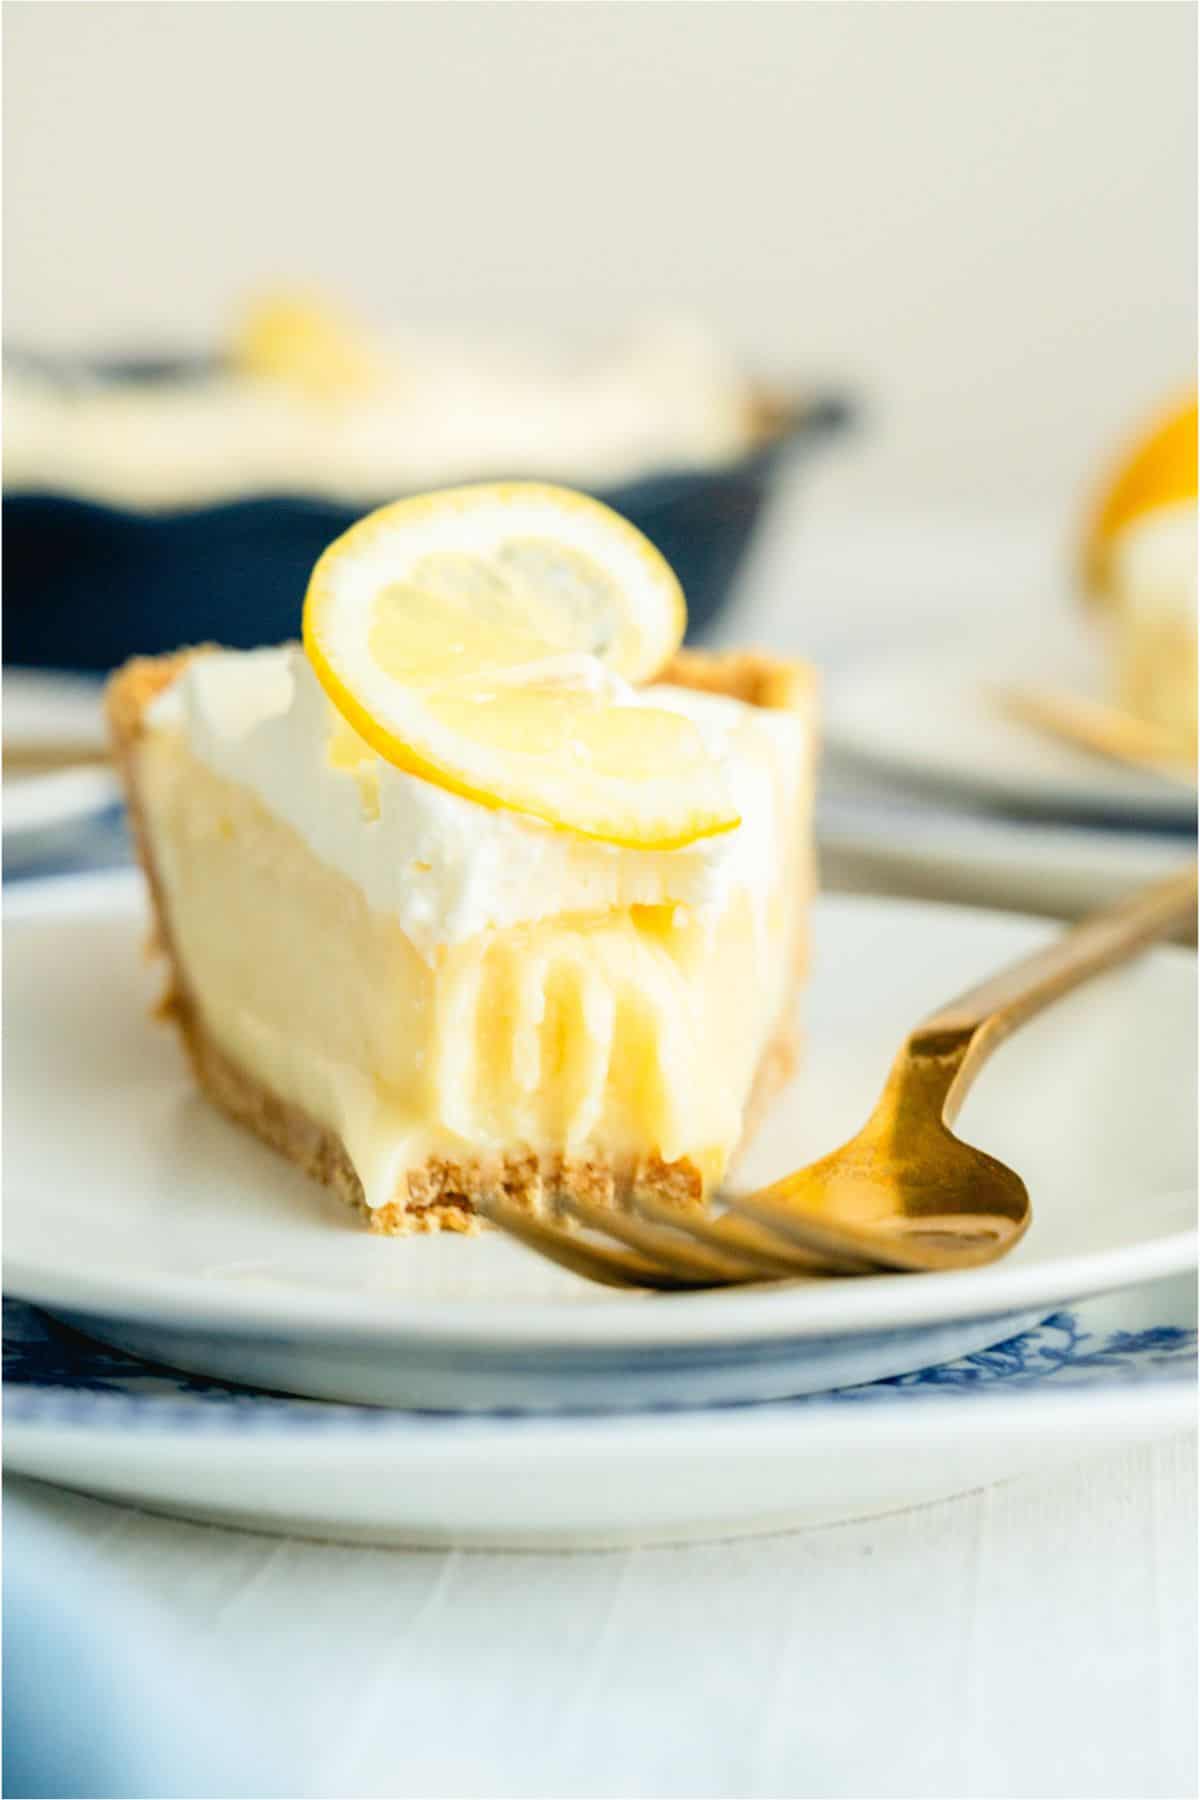 A slice of Creamy Lemon Pie on a plate with a for and a bite missing